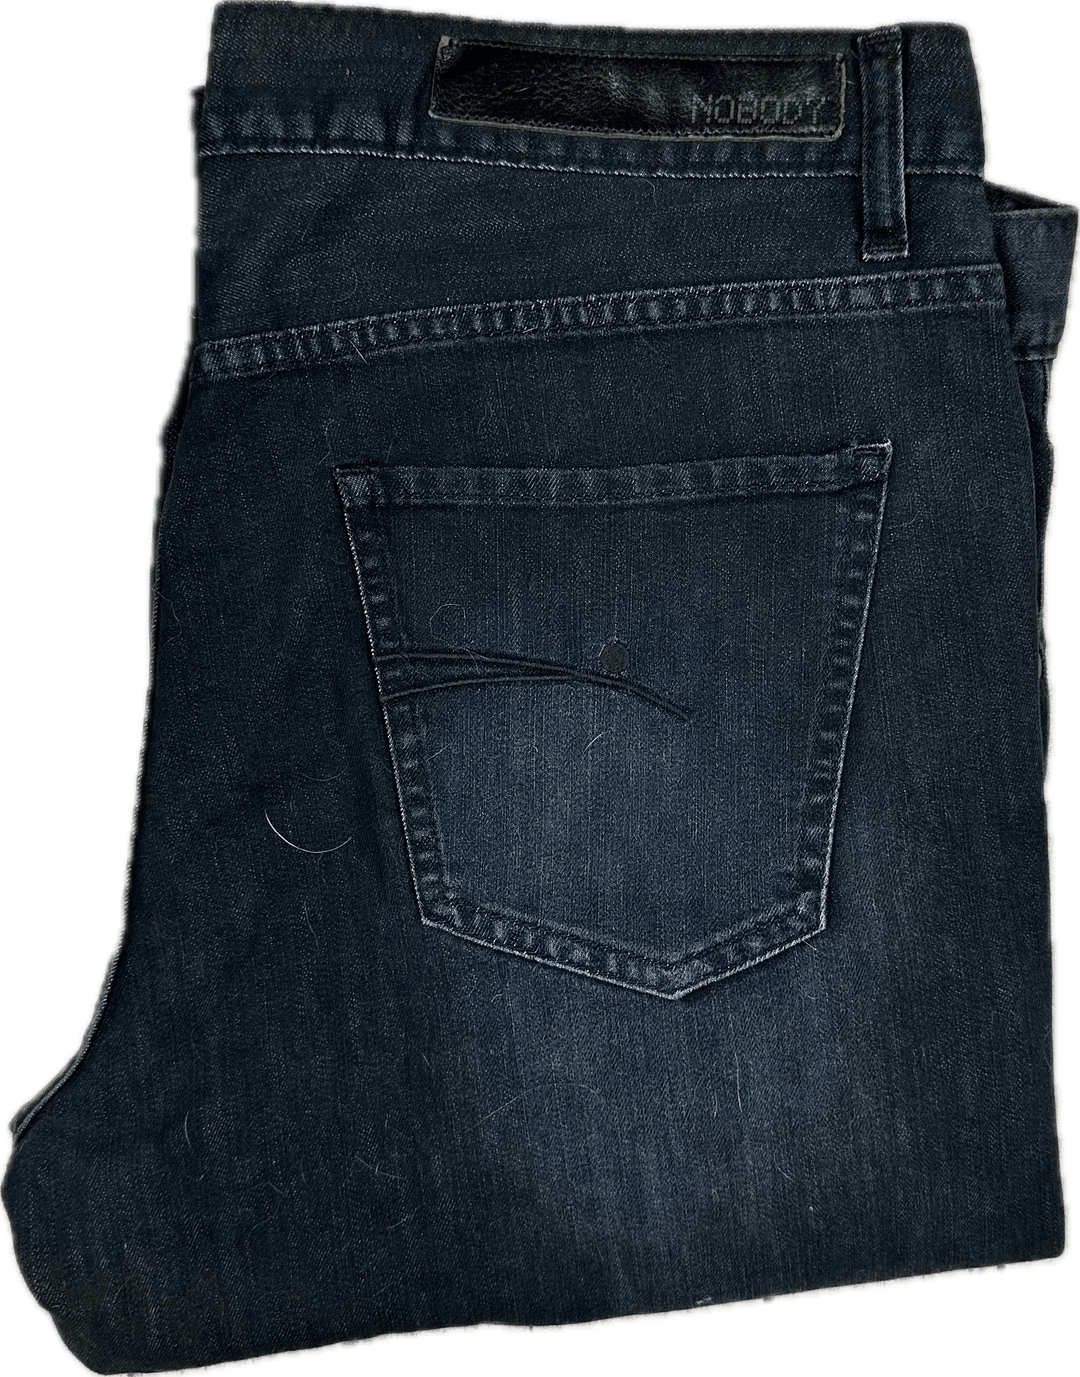 NOBODY 'Vic Stene' Mid Rise Straight Mens Jeans - Size 38 - Jean Pool